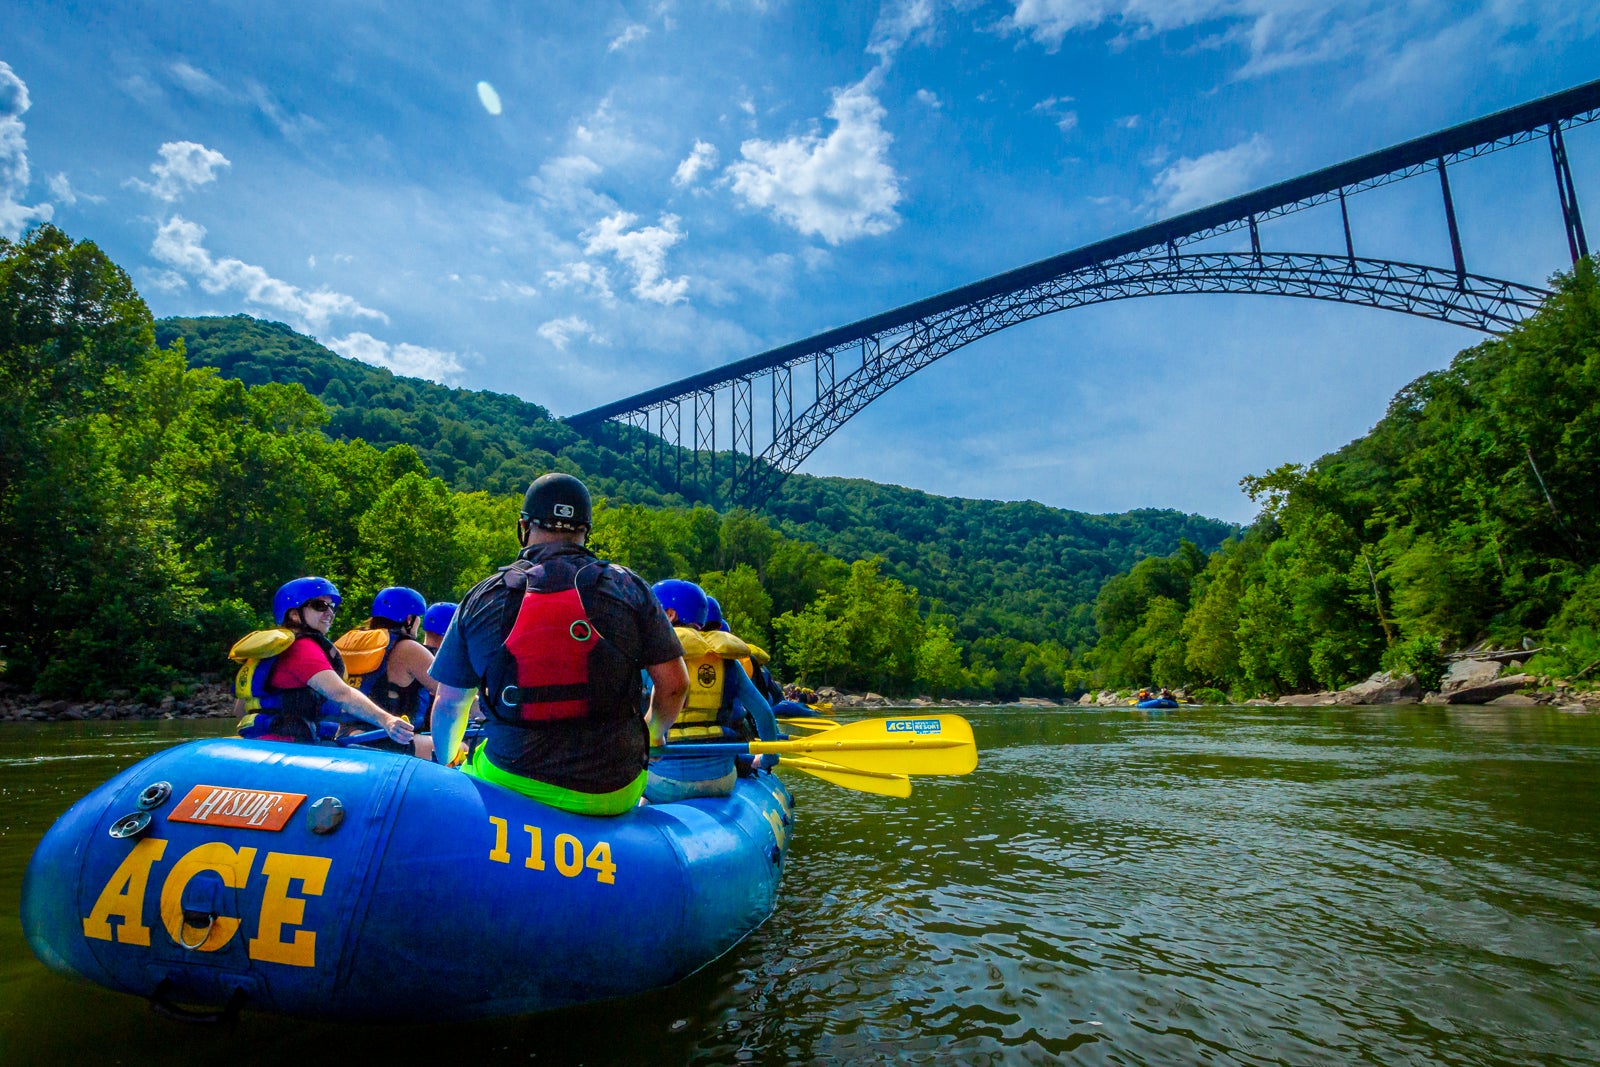 whitewater rafting on the New River